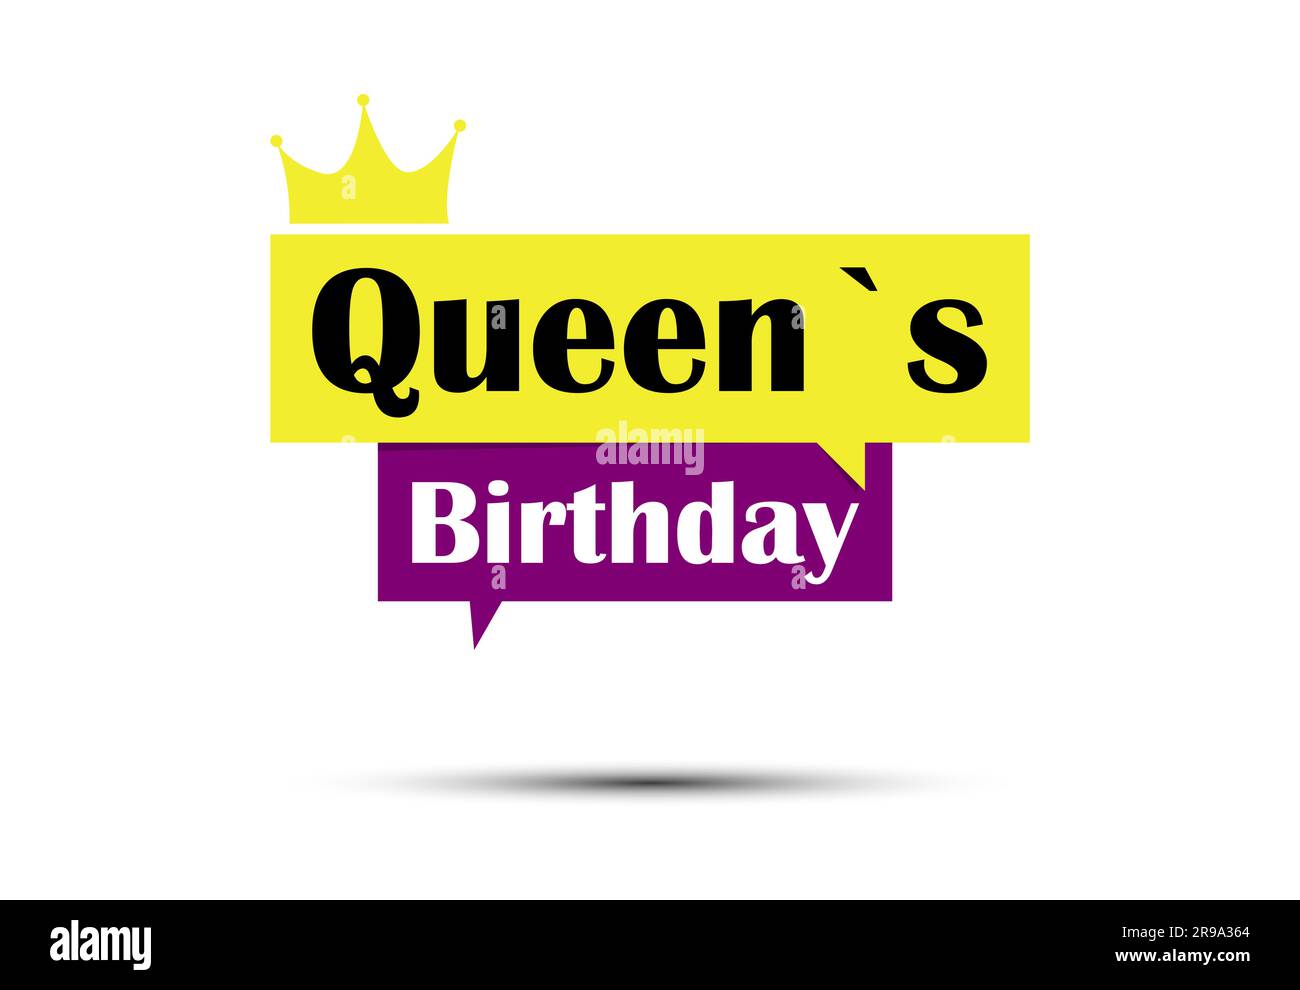 Queen's birthday greeting card illustration. Bright speech bauble with the text Stock Vector